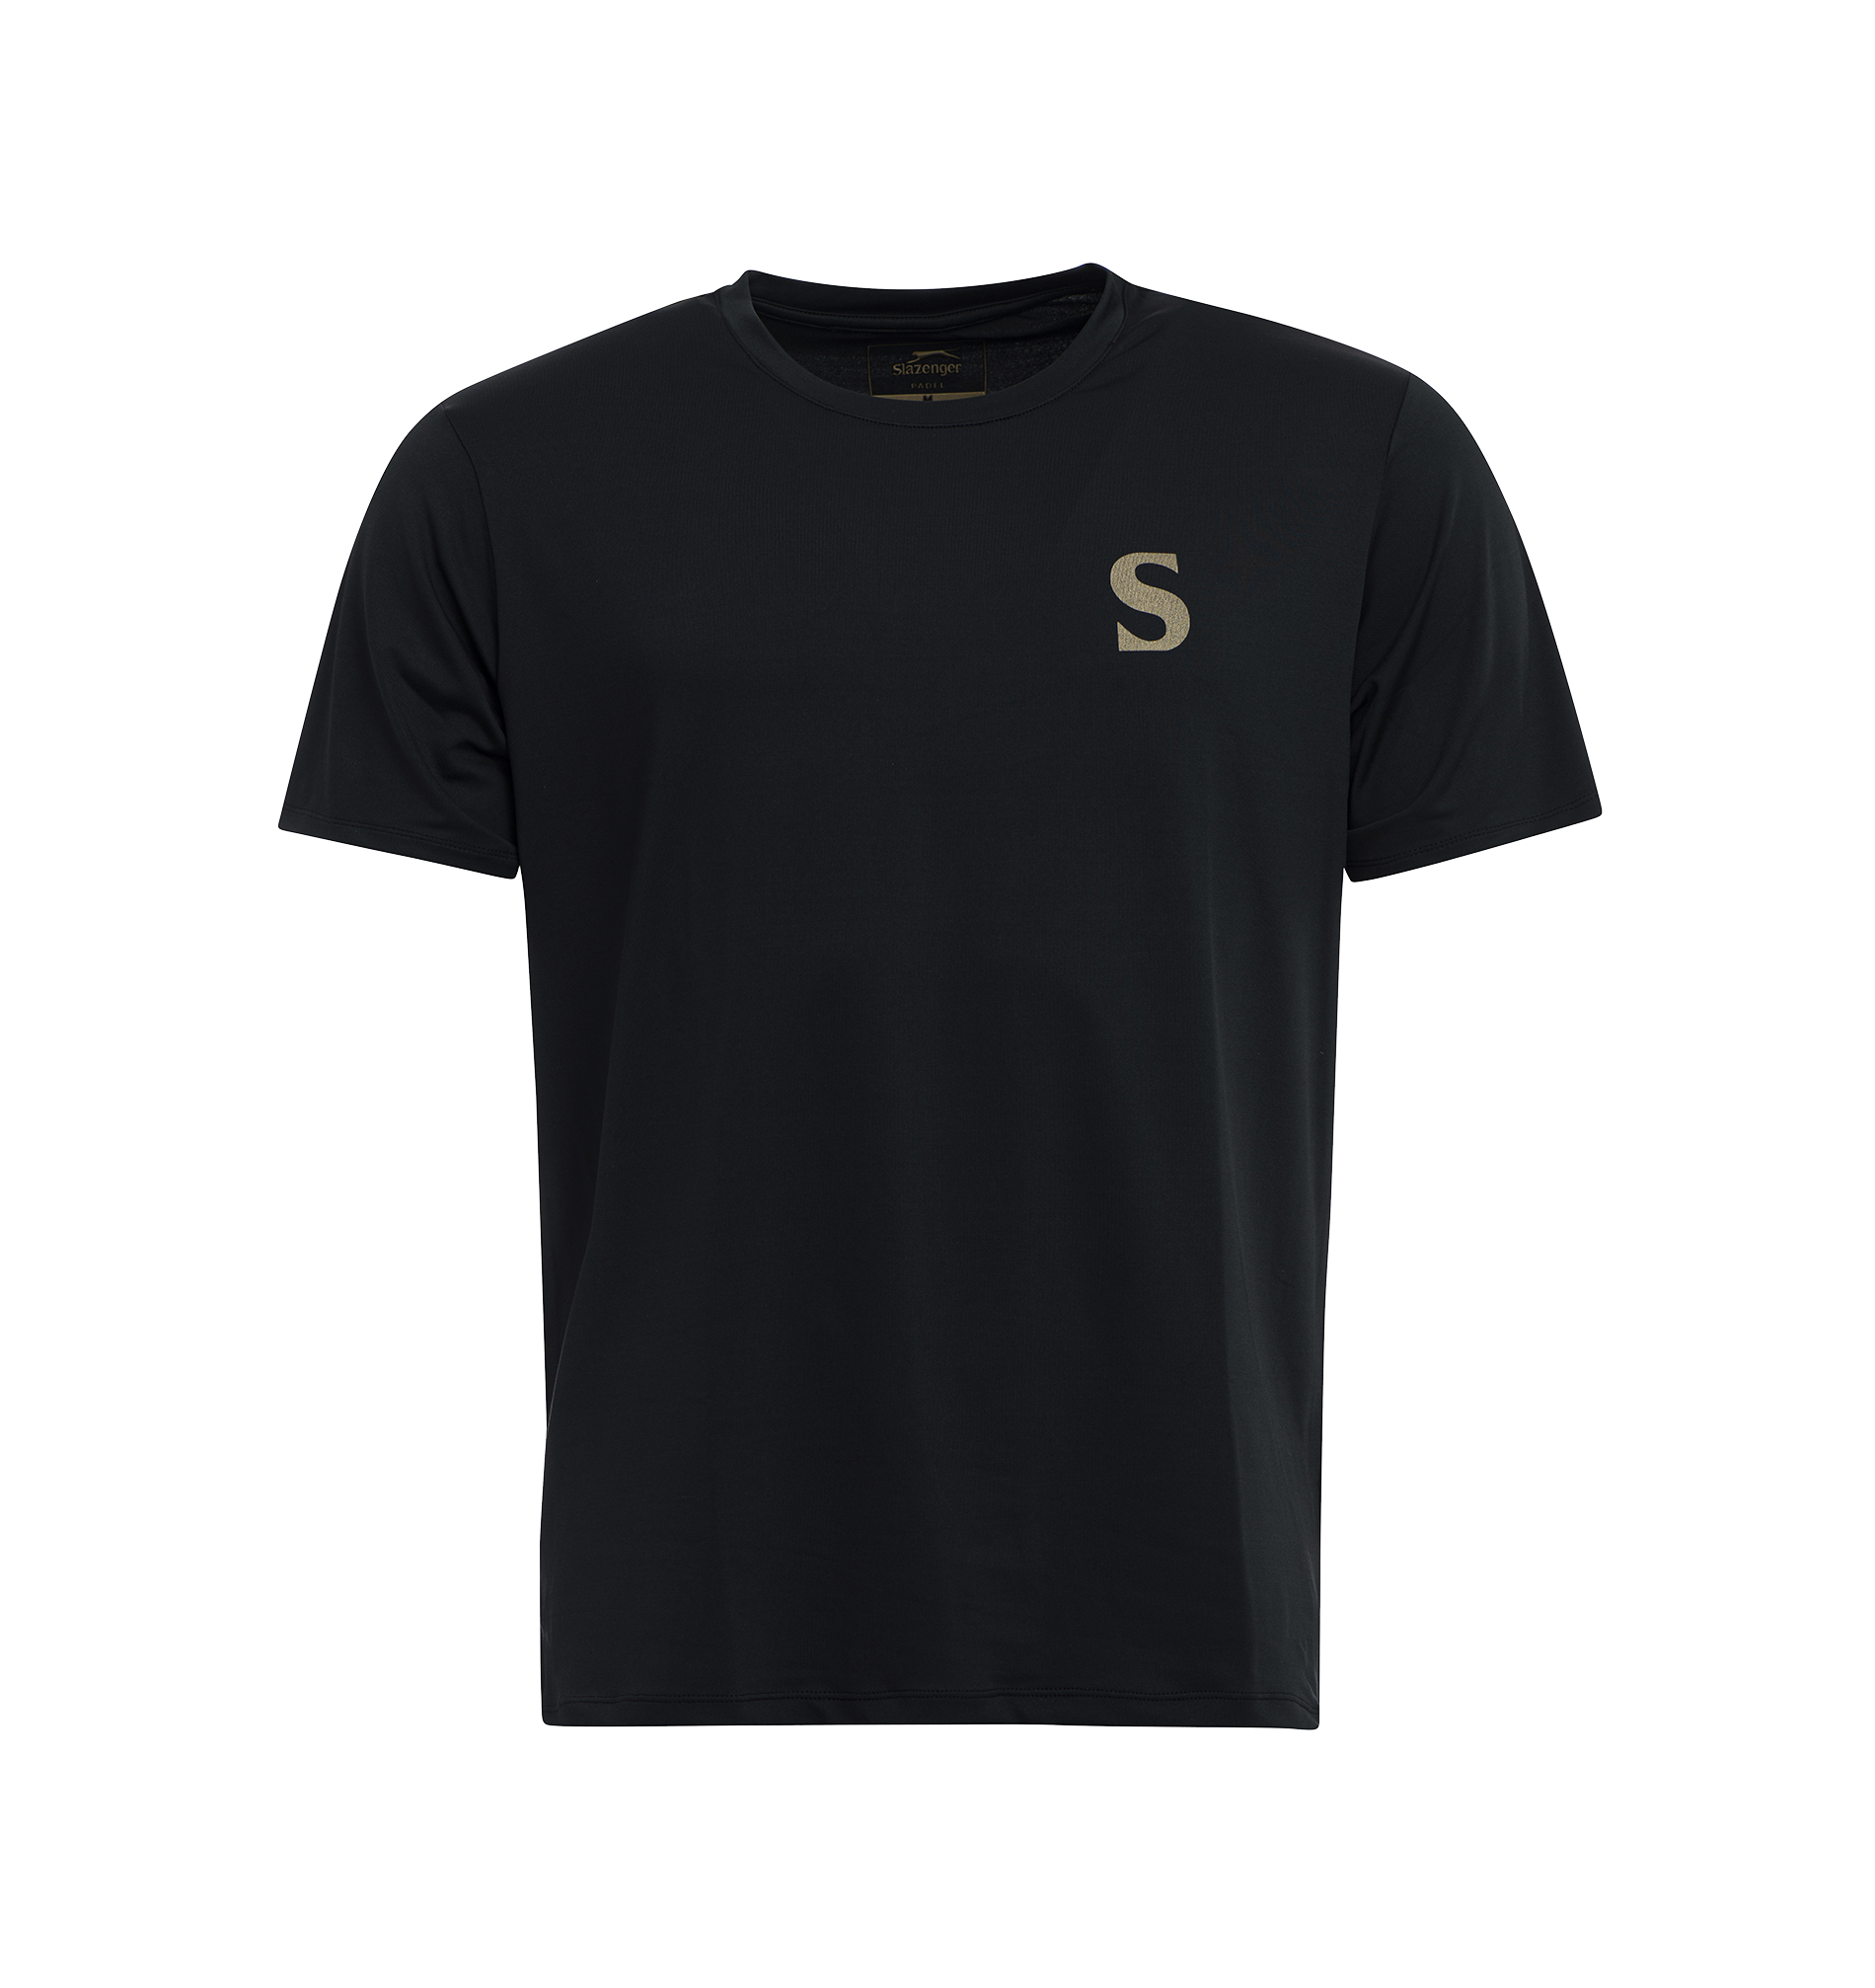 THE S TEE PANTHER BLACK